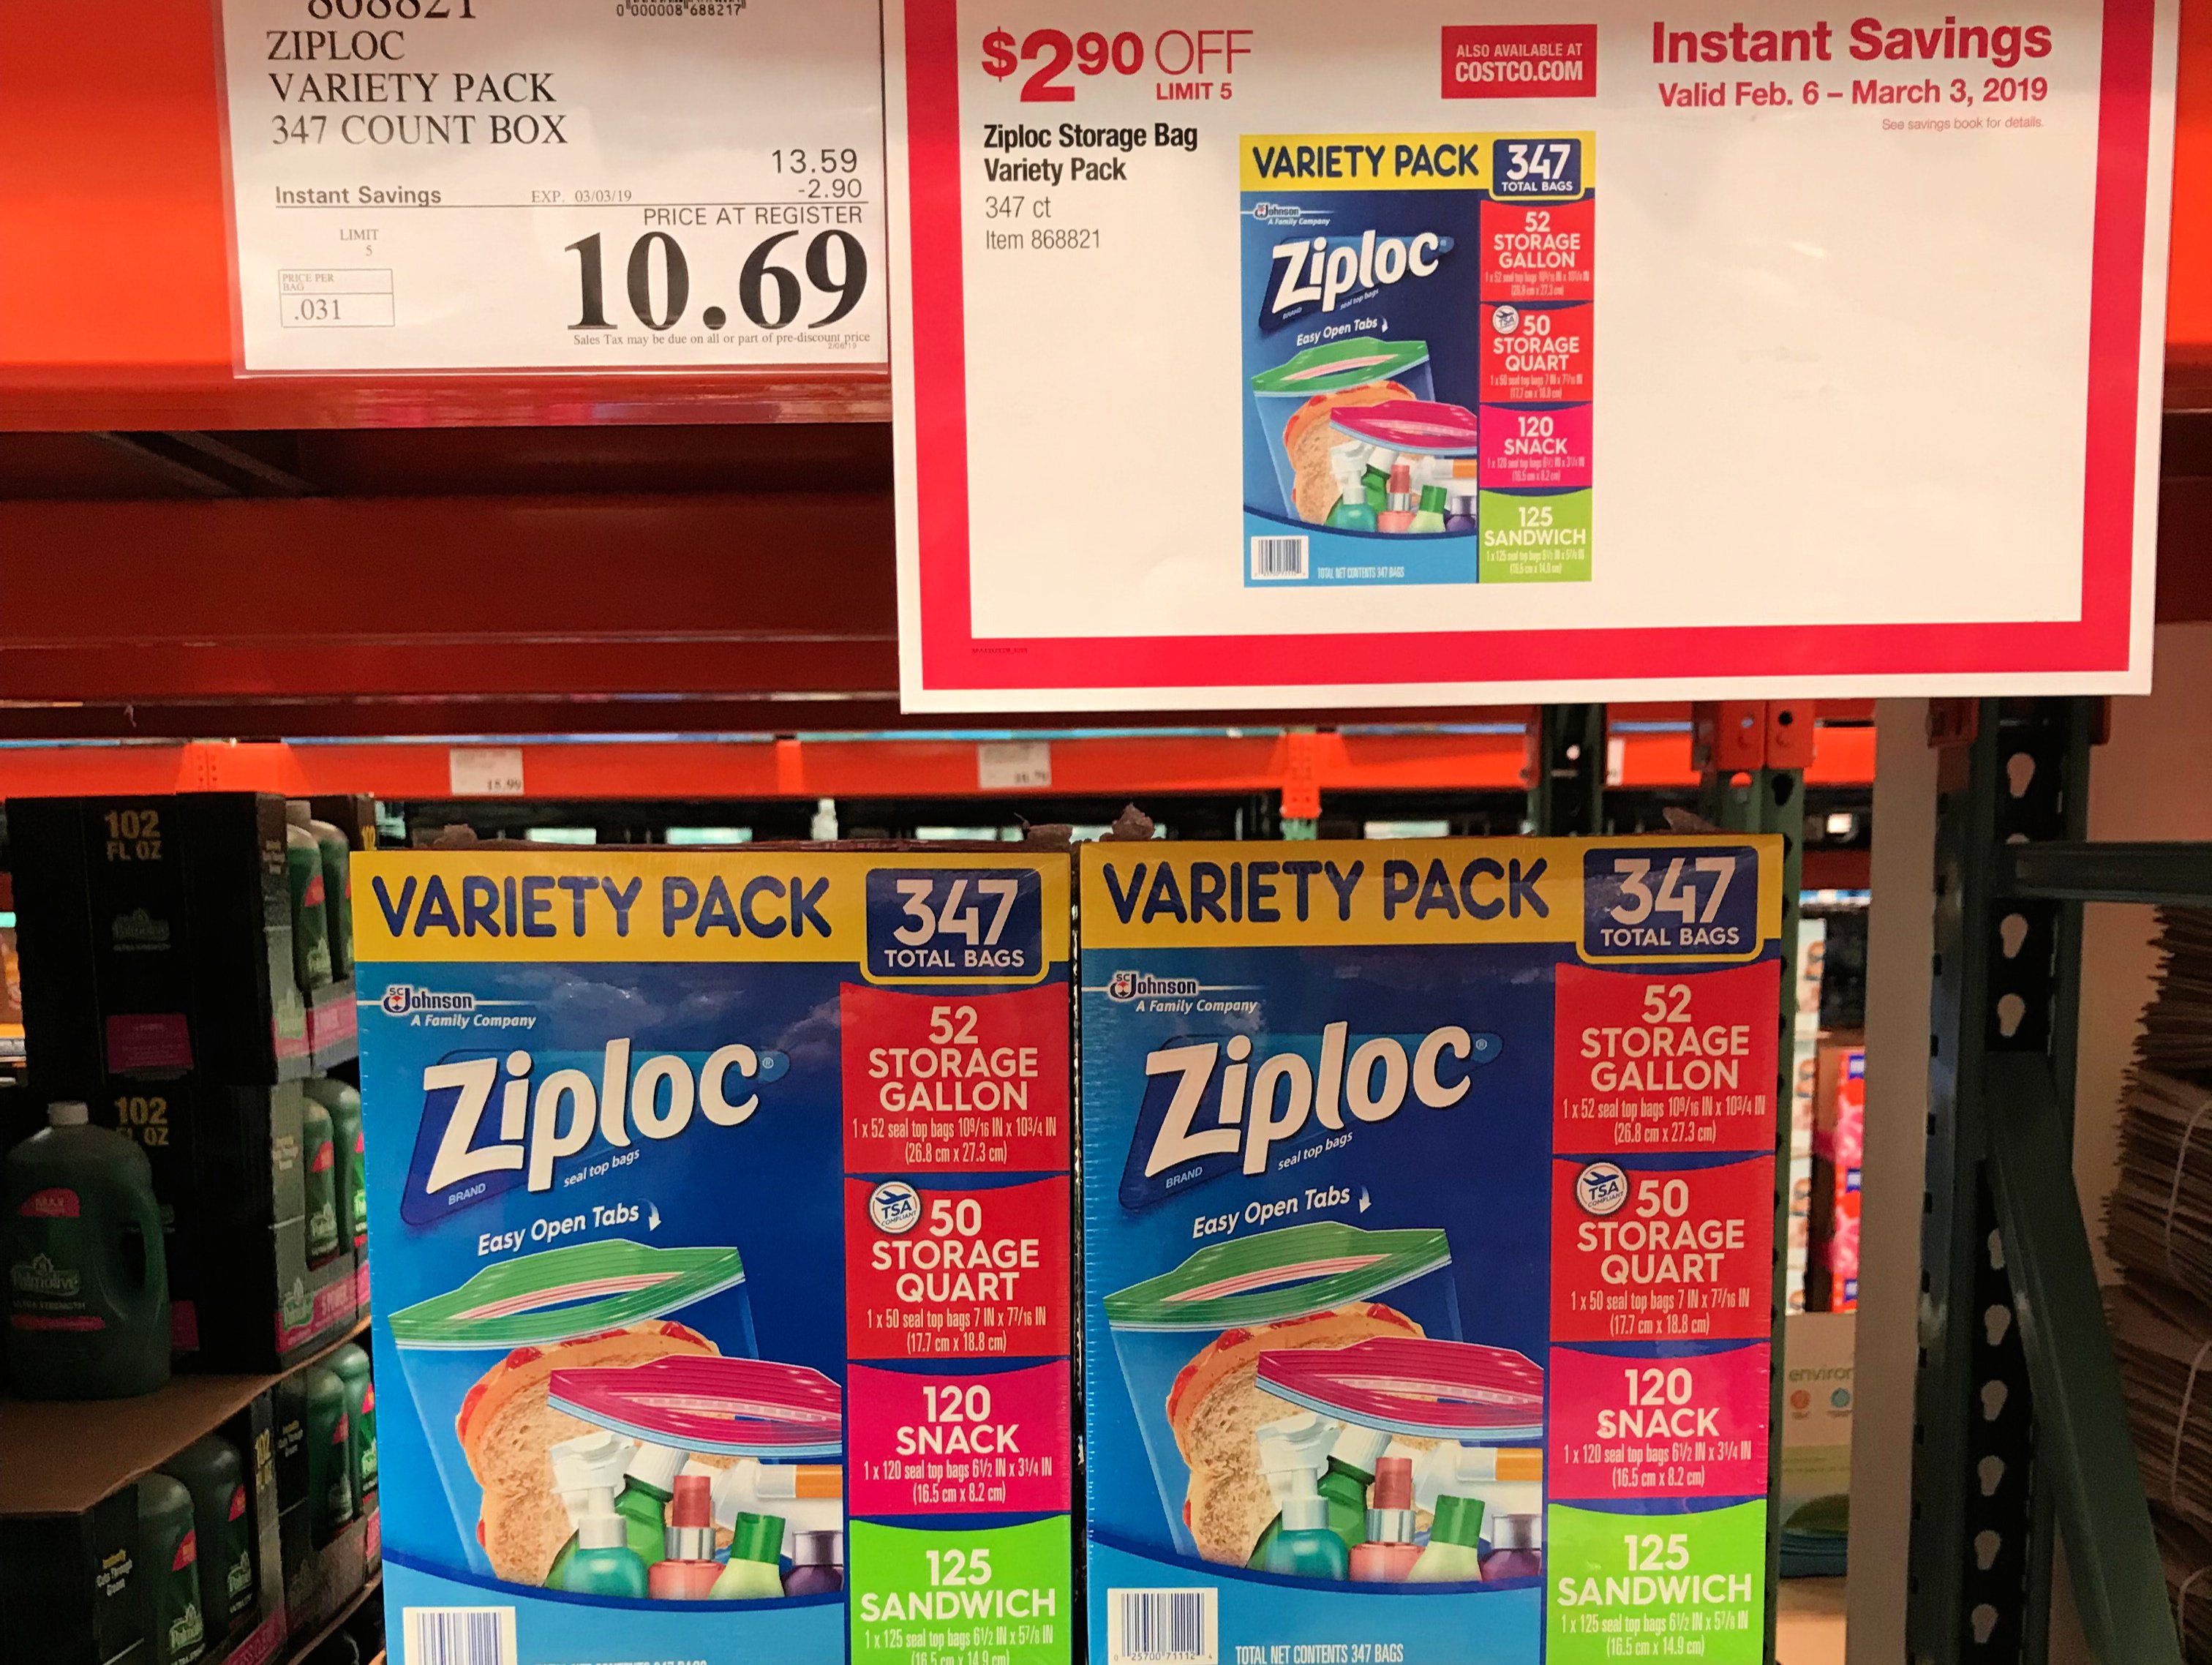 http://www.livingrichwithcoupons.com/wp-content/uploads/2019/02/Costco_Ziploc_IMG_25601.jpg